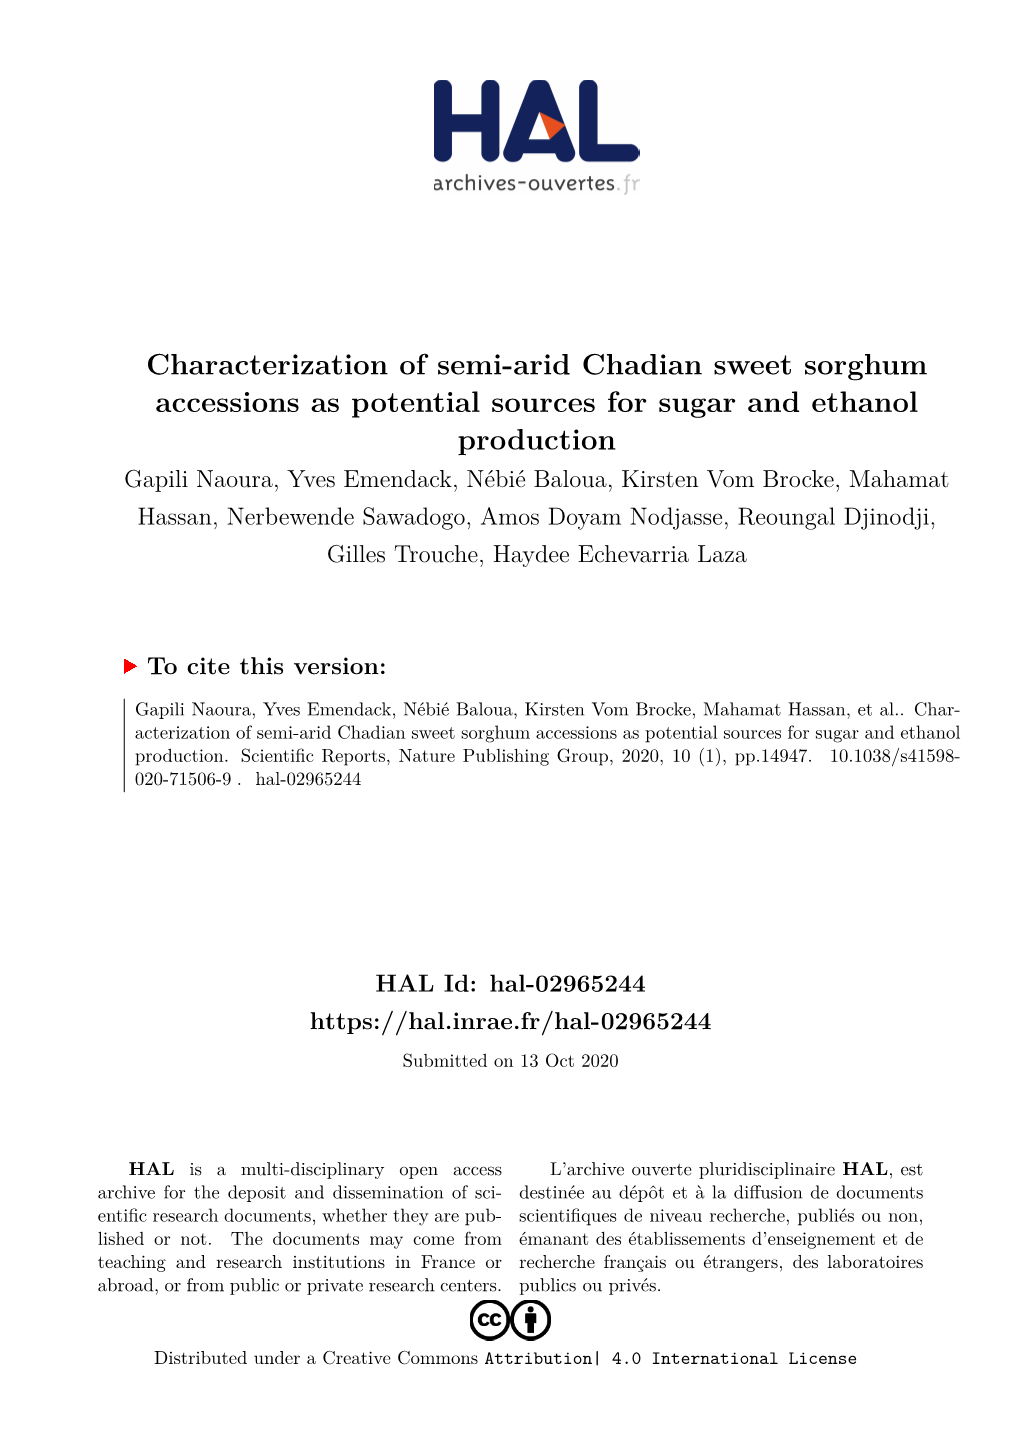 Characterization of Semi-Arid Chadian Sweet Sorghum Accessions As Potential Sources for Sugar and Ethanol Production